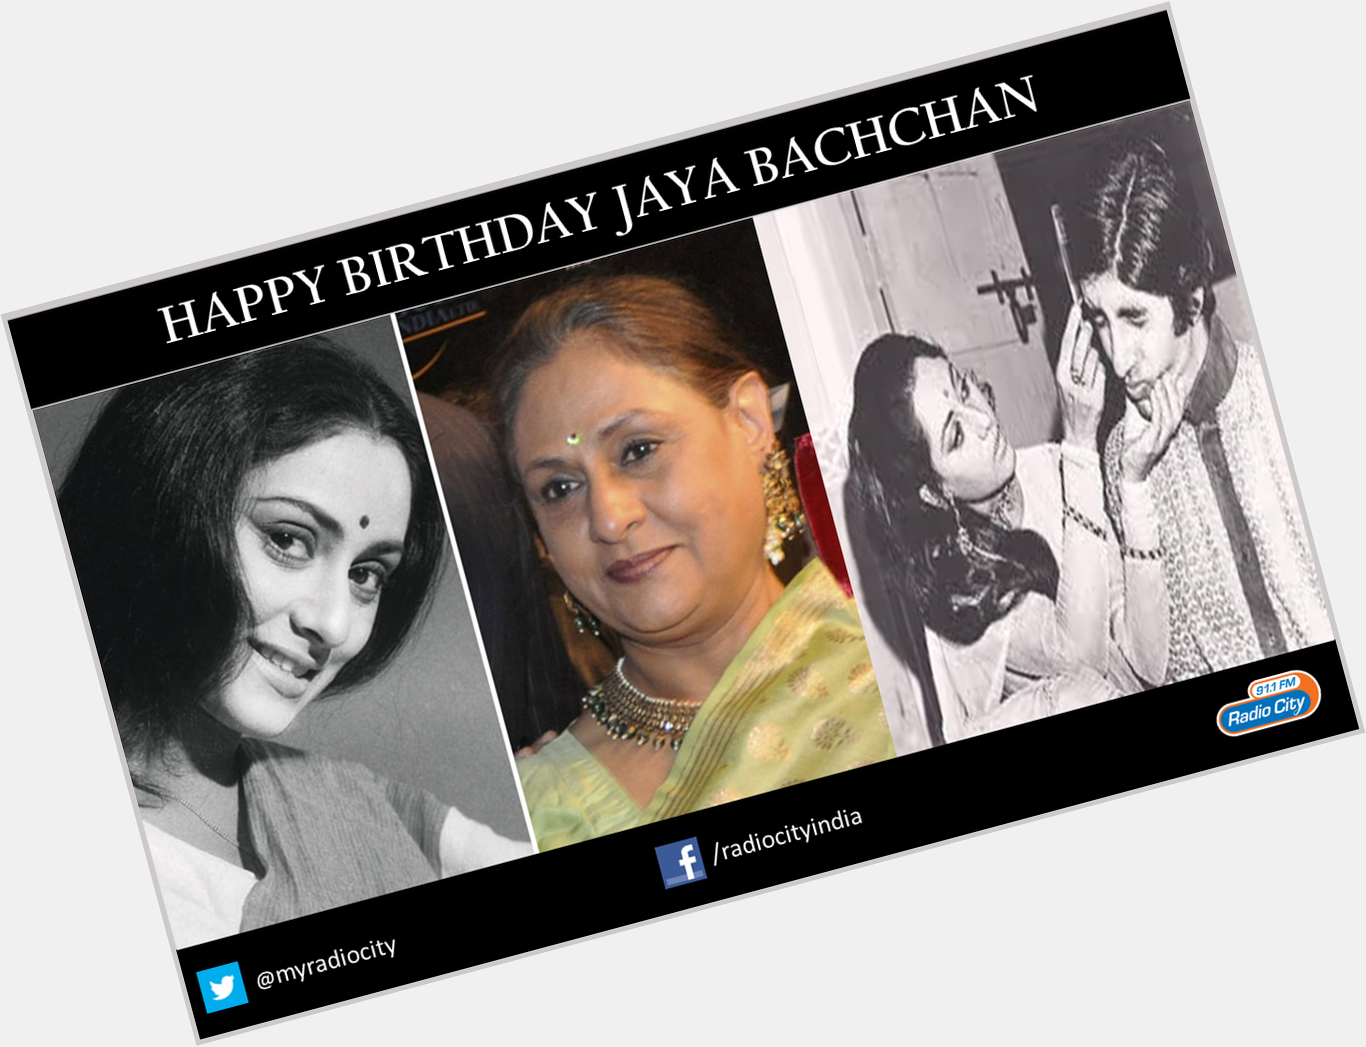 Best Wishes to one of the most graceful actors of -Happy Birthday Jaya Bachchan 